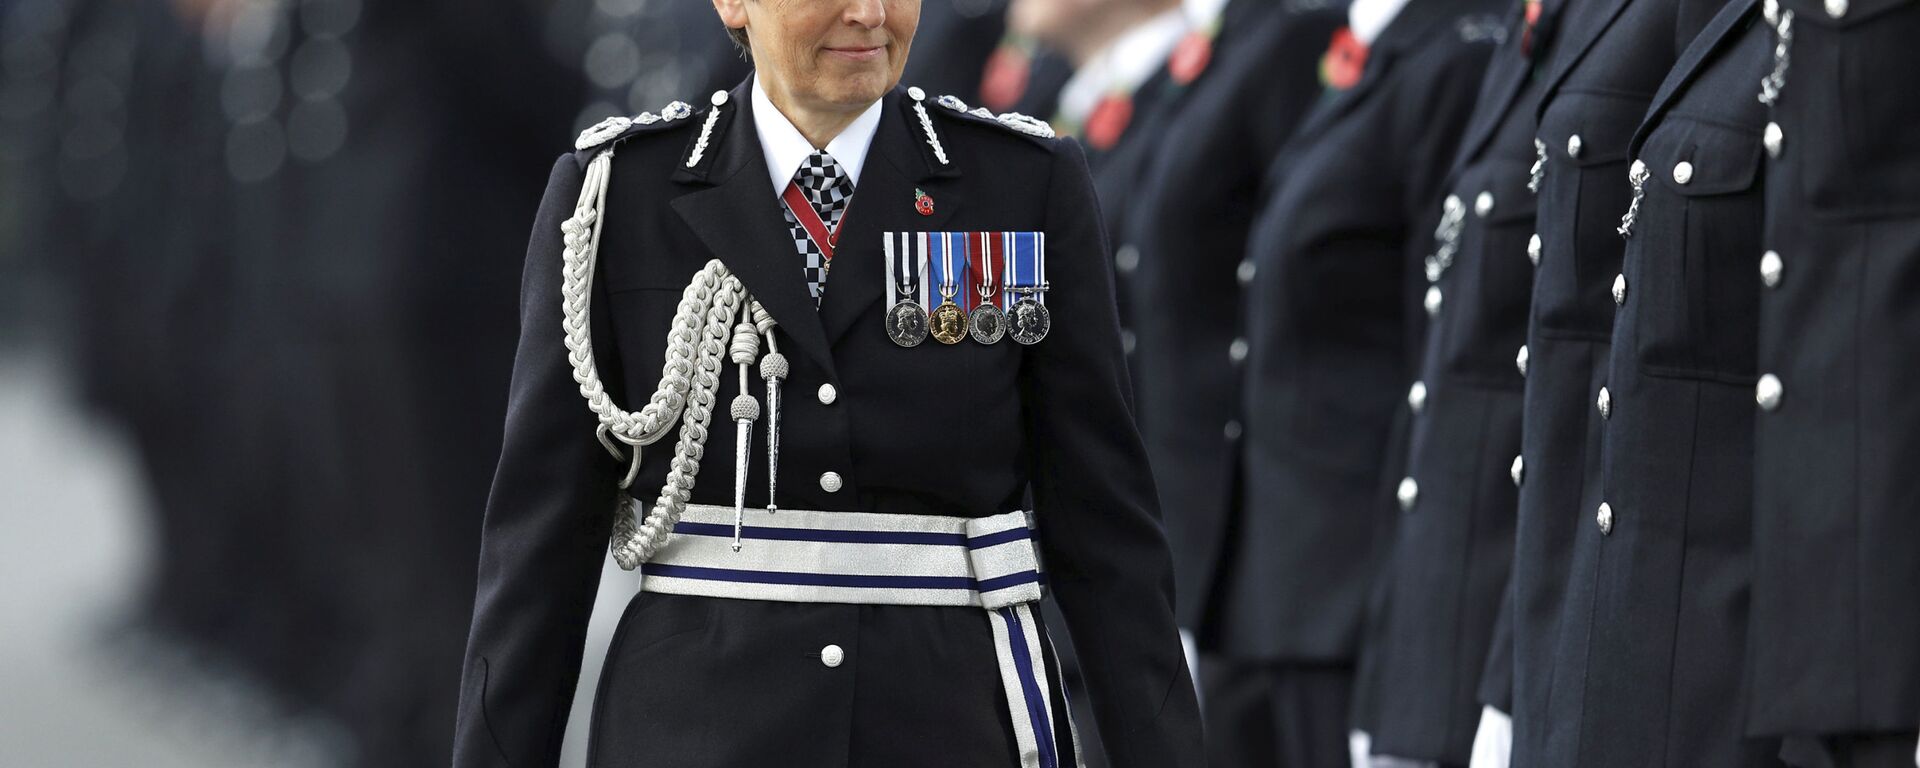 Britain's Metropolitan Police Commissioner Cressida Dick inspects police cadets at the Metropolitan Police Service Passing Out Parade at Hendon, in London, Friday Nov. 3, 2017 - Sputnik International, 1920, 12.02.2021